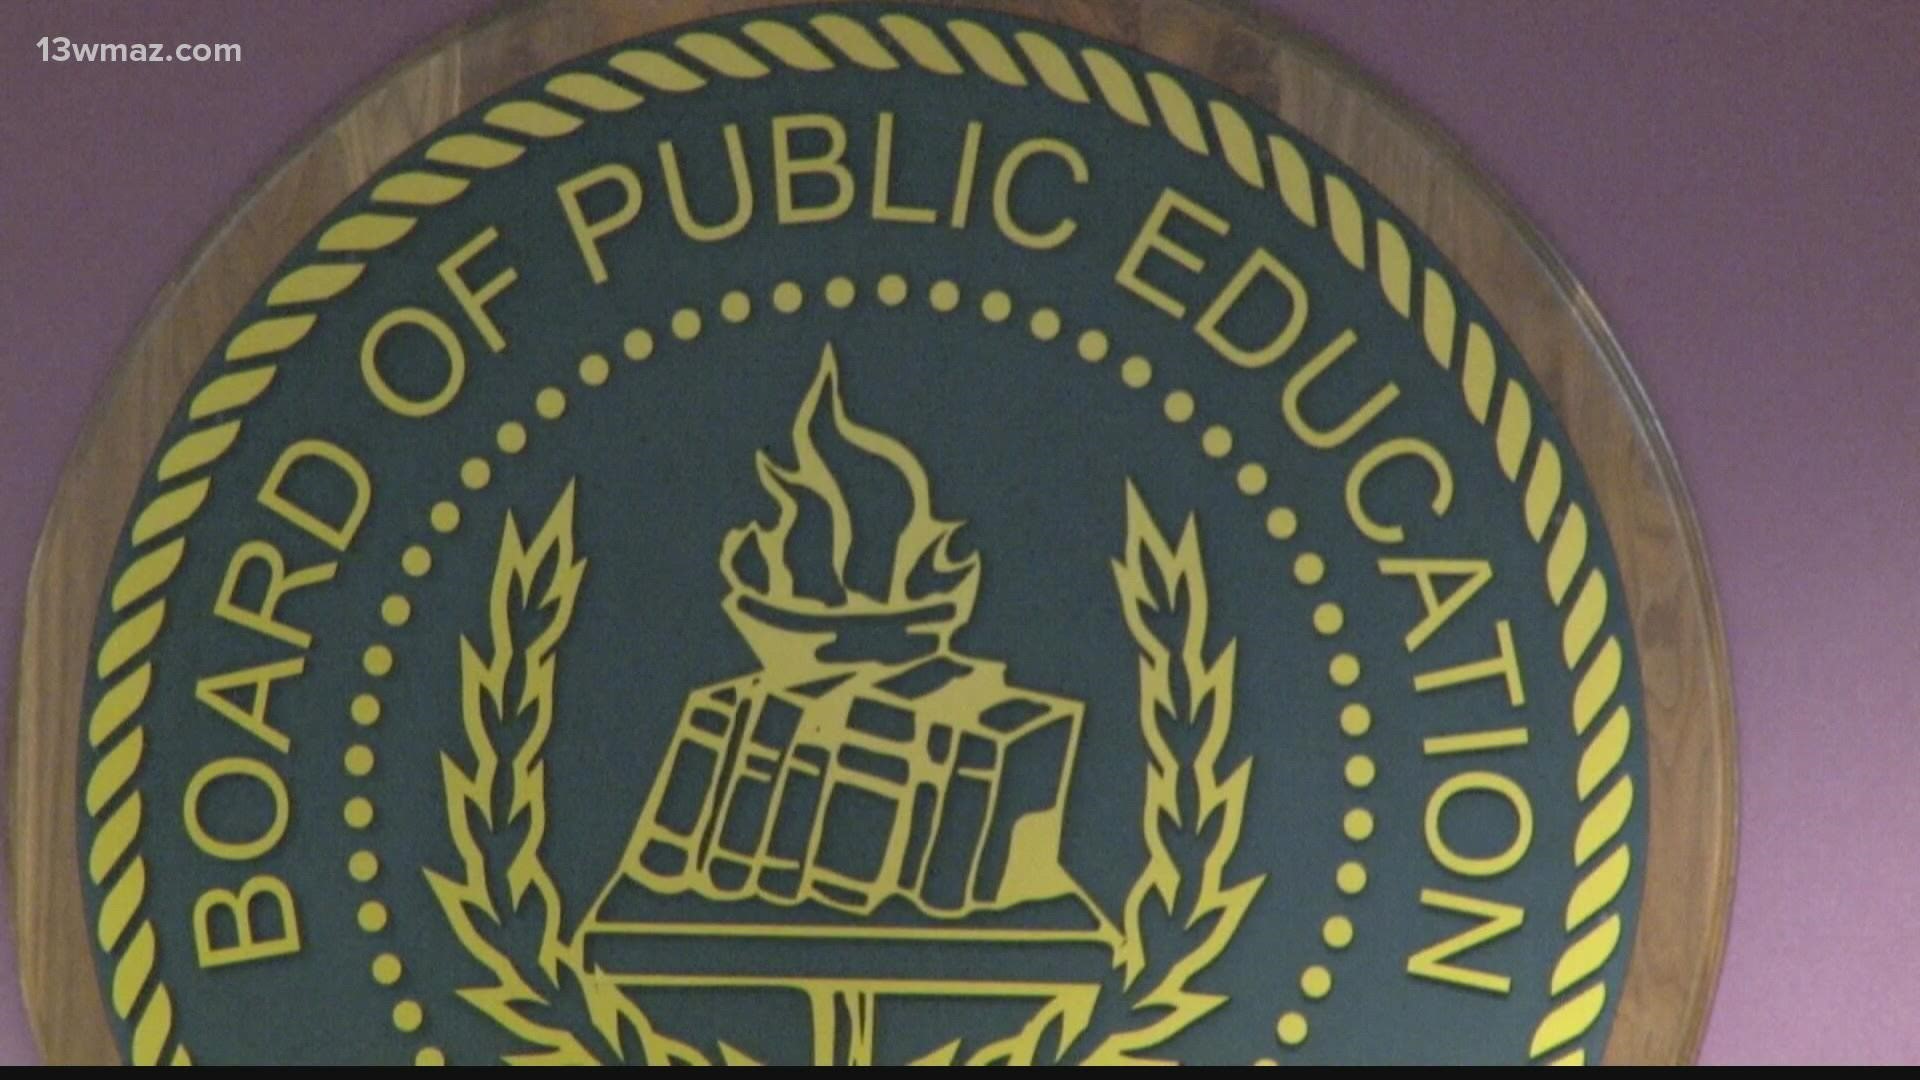 The Bibb school board recently released results of their public survey showing many members of the public supported two in-house candidates.